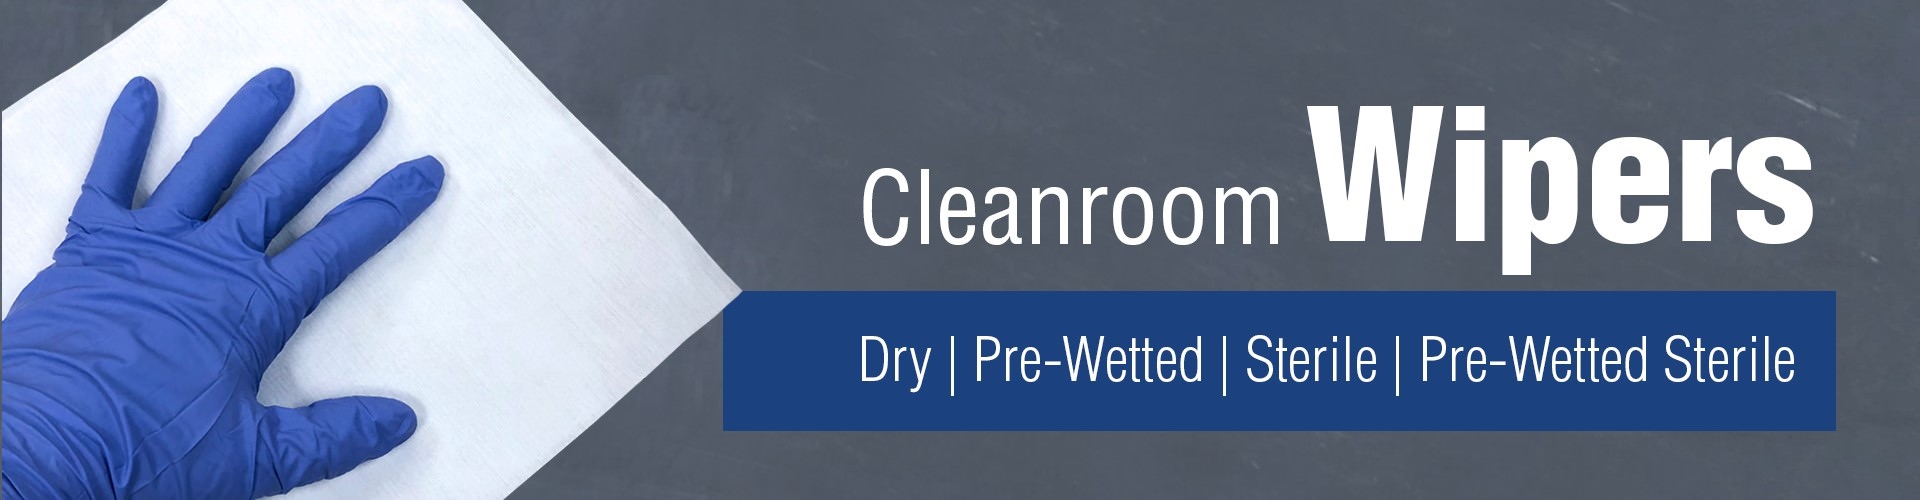 Clean Room Wipers - Dry | Pre-Wetted | Sterile | Pre-Wetted Sterile